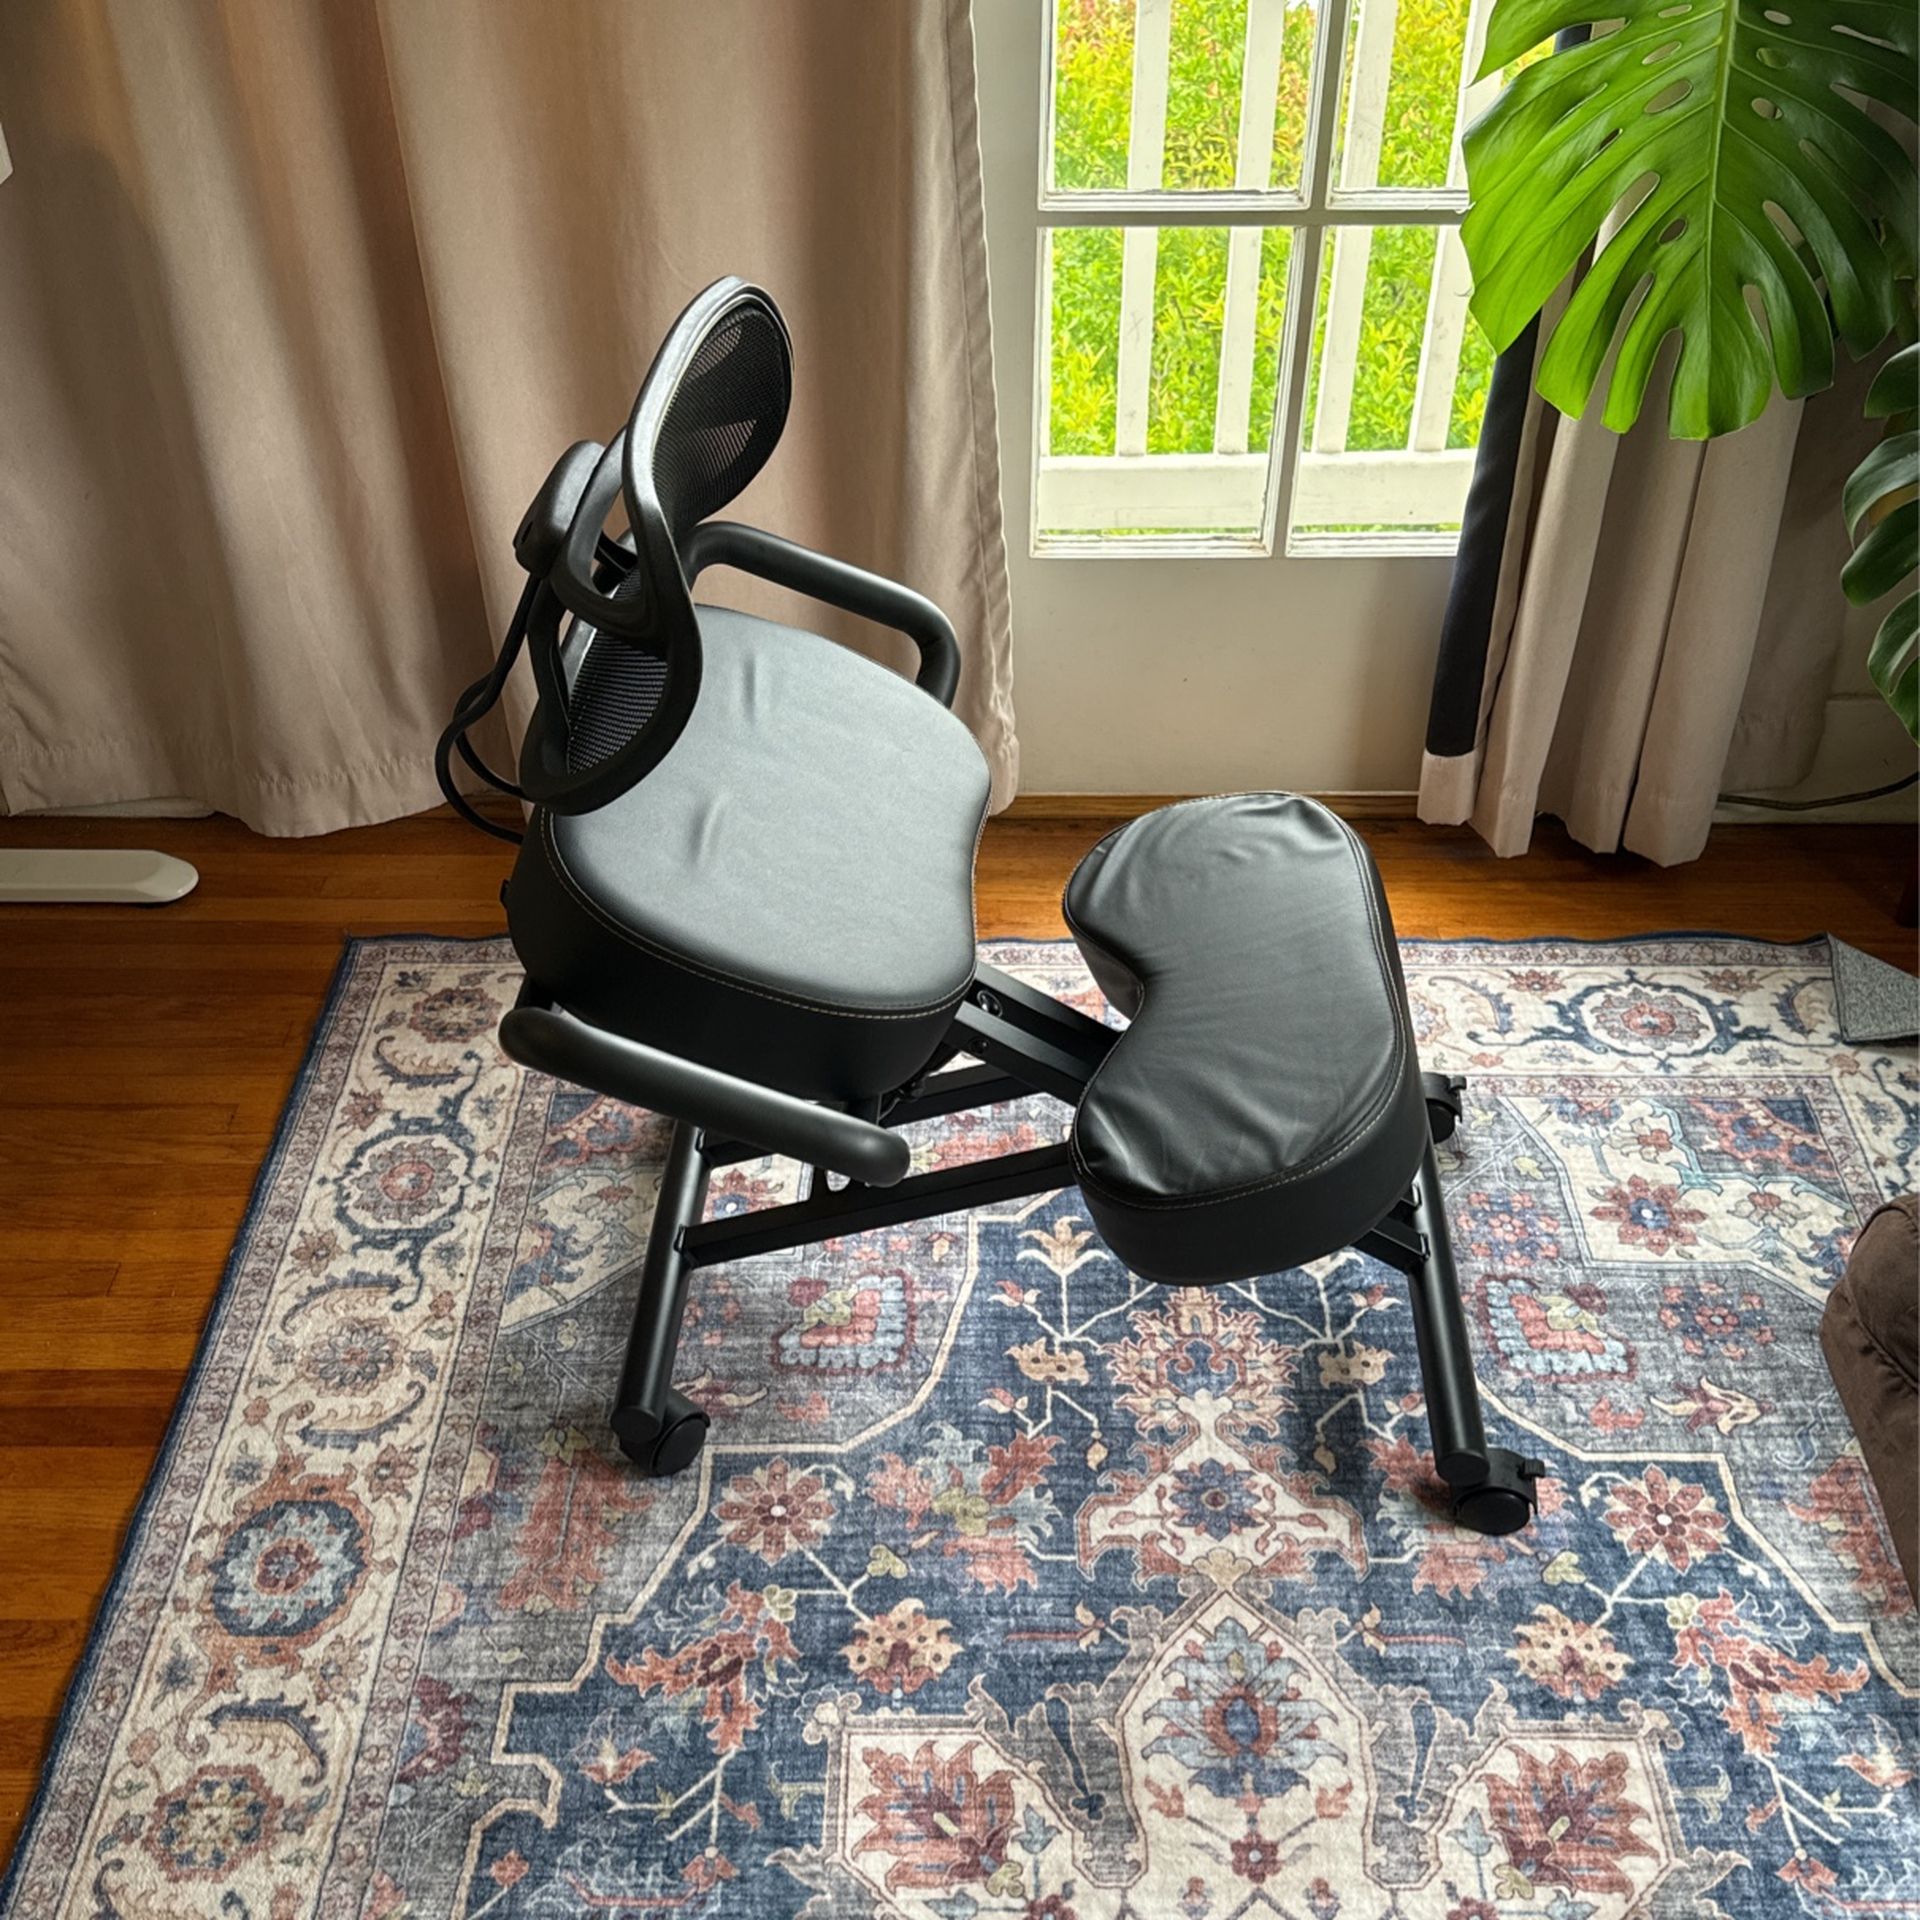 New! Kneeling Chair With Back Support 